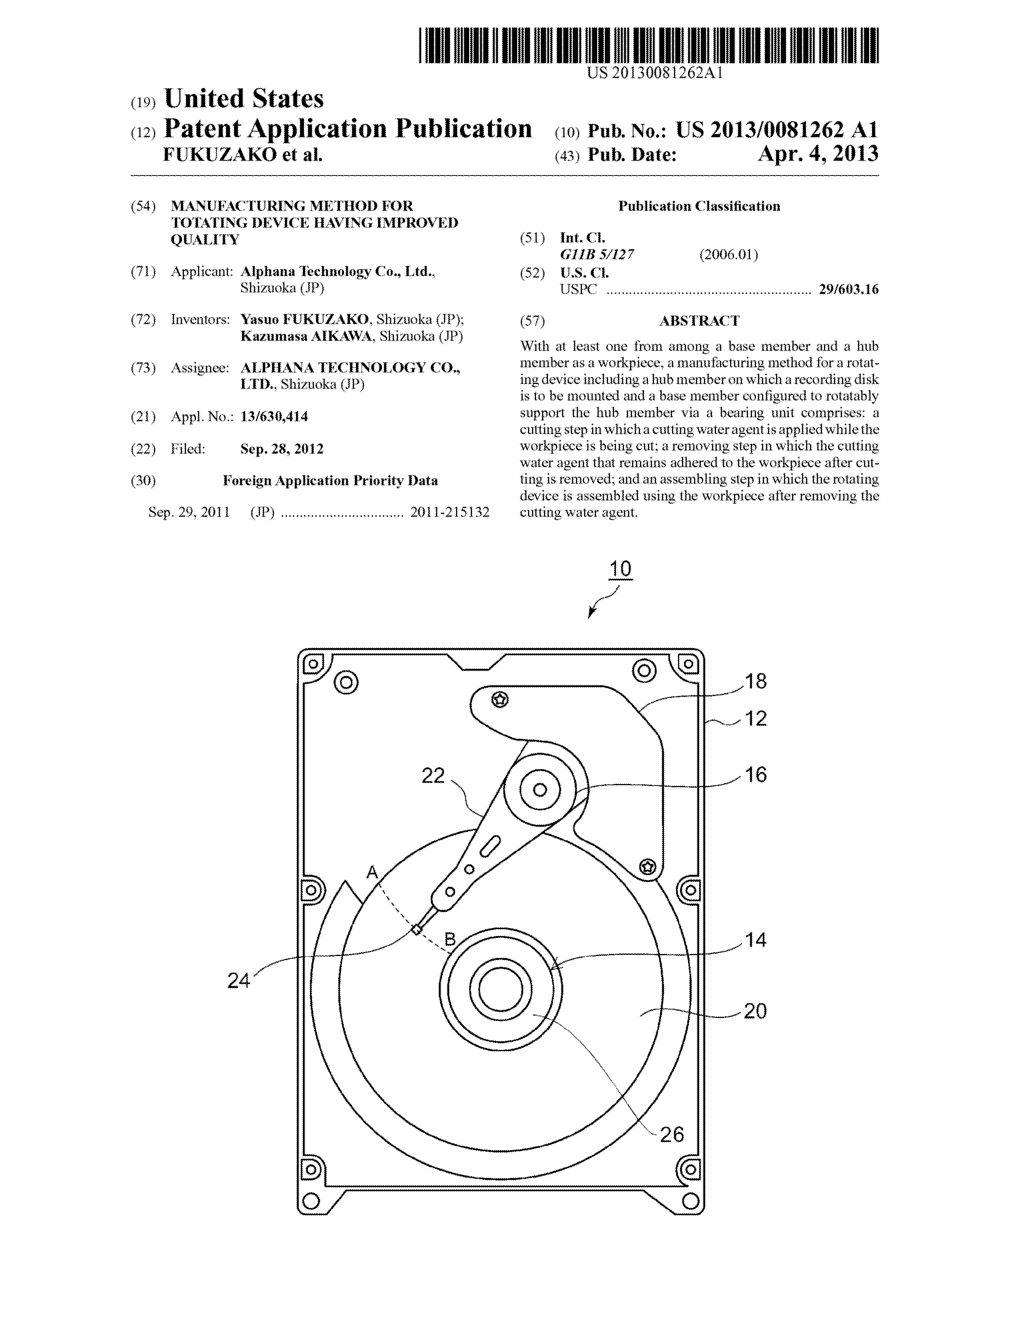 MANUFACTURING METHOD FOR TOTATING DEVICE HAVING IMPROVED QUALITY - diagram, schematic, and image 01